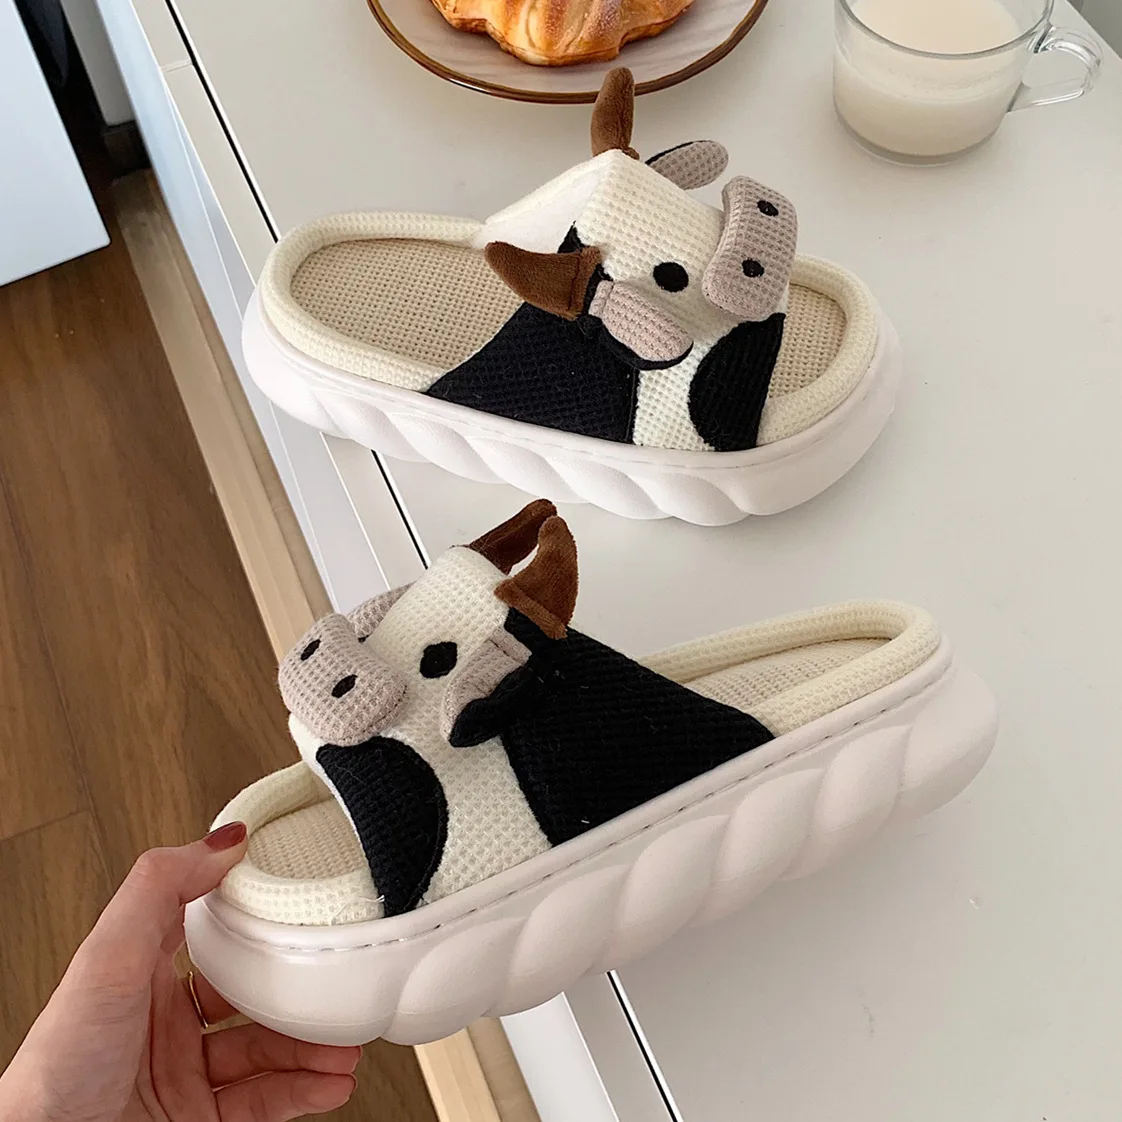 2022 Women's Slippers Summer Four Seasons Indoor Home Sandals and Slippers Cute Cartoon Milk Cow House Slippers Funny Shoes images - 6